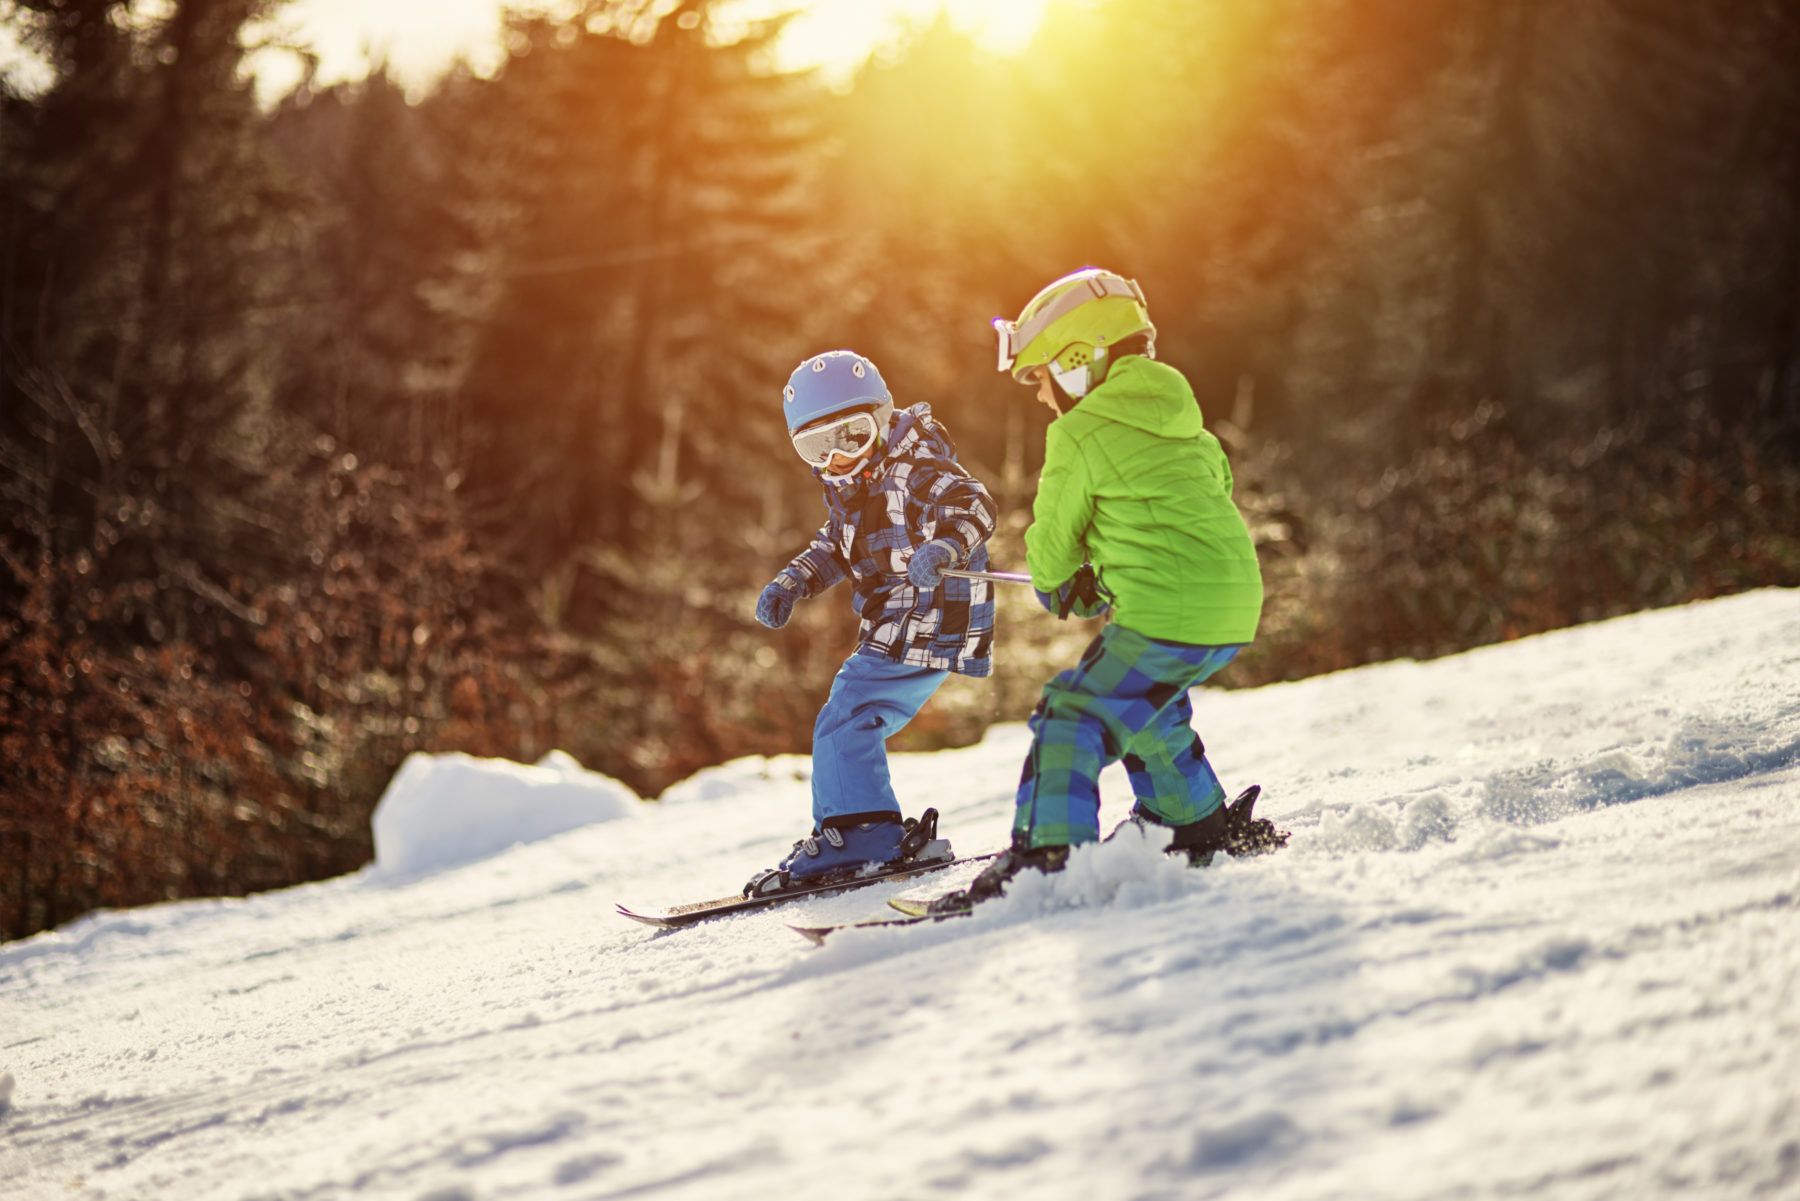 You are currently viewing Safety Planning for Young Skiers